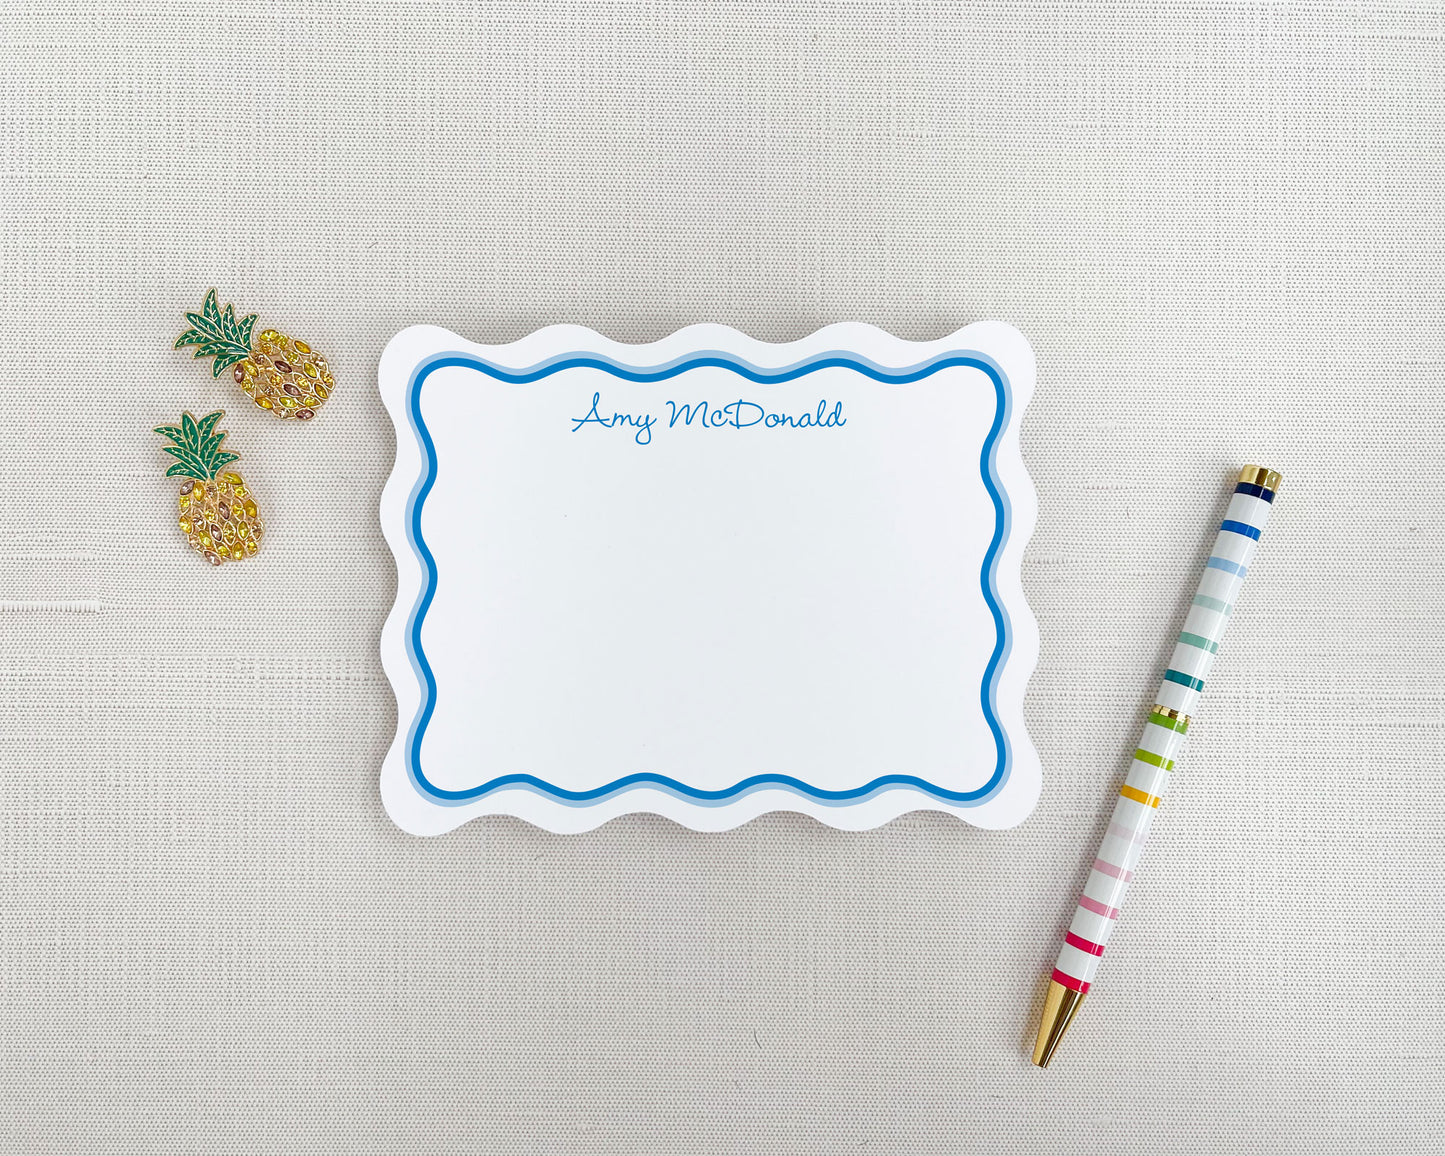 Wavy Edge Personalized Stationery with Multicolored Border